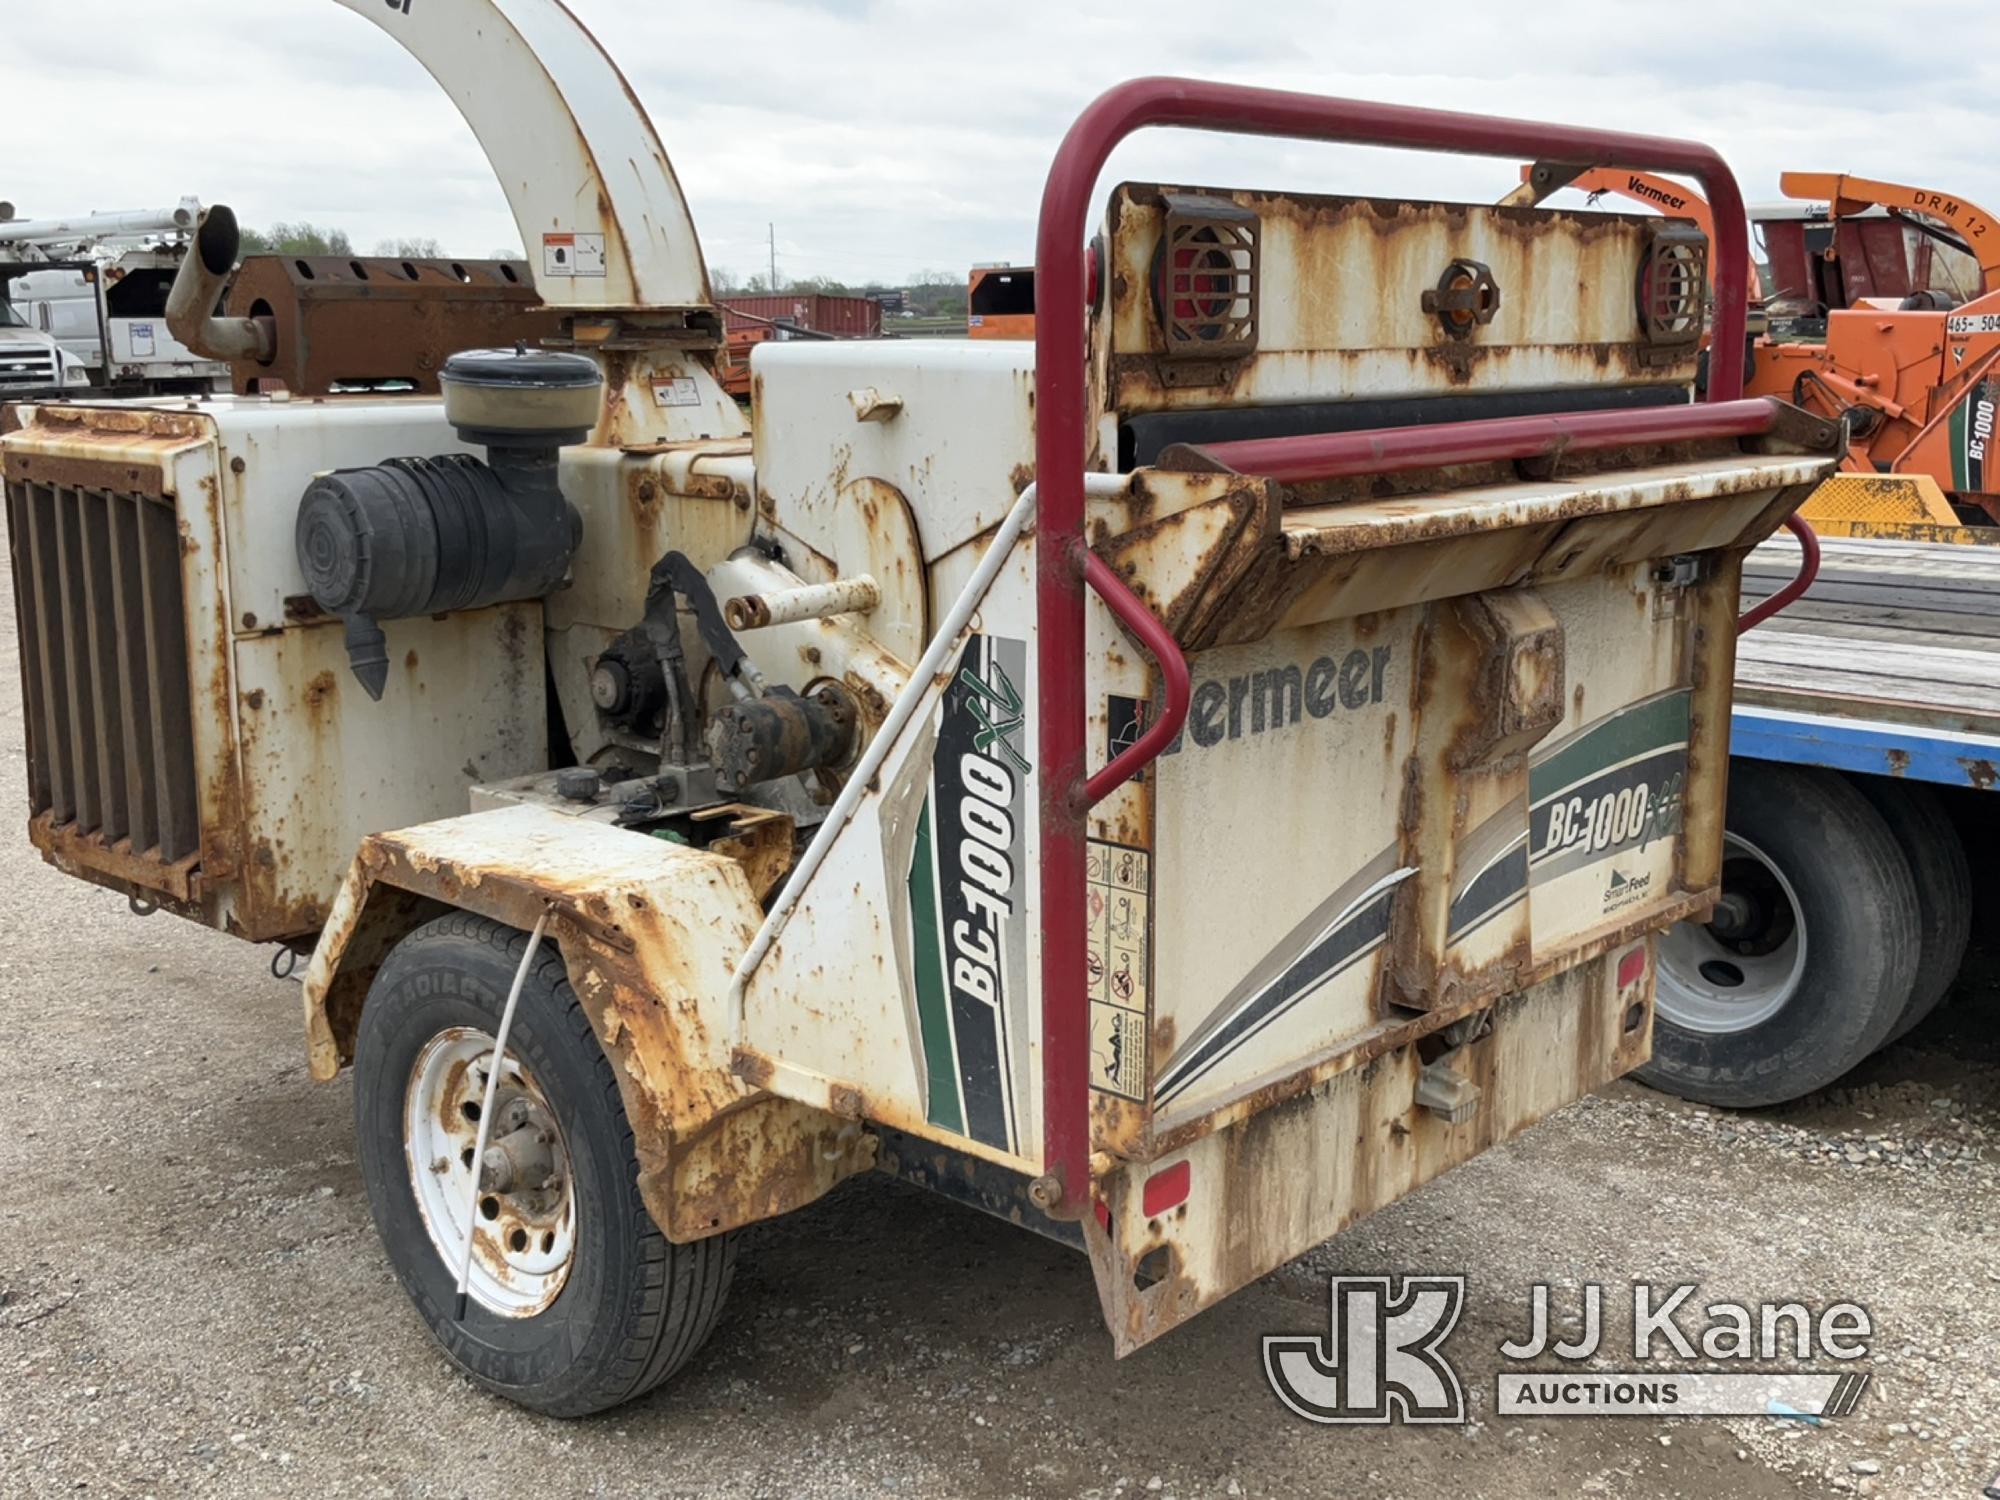 (Charlotte, MI) 2016 Vermeer BC1000XL Chipper (12in Drum) No Title, Condition Unknown, No Crank With